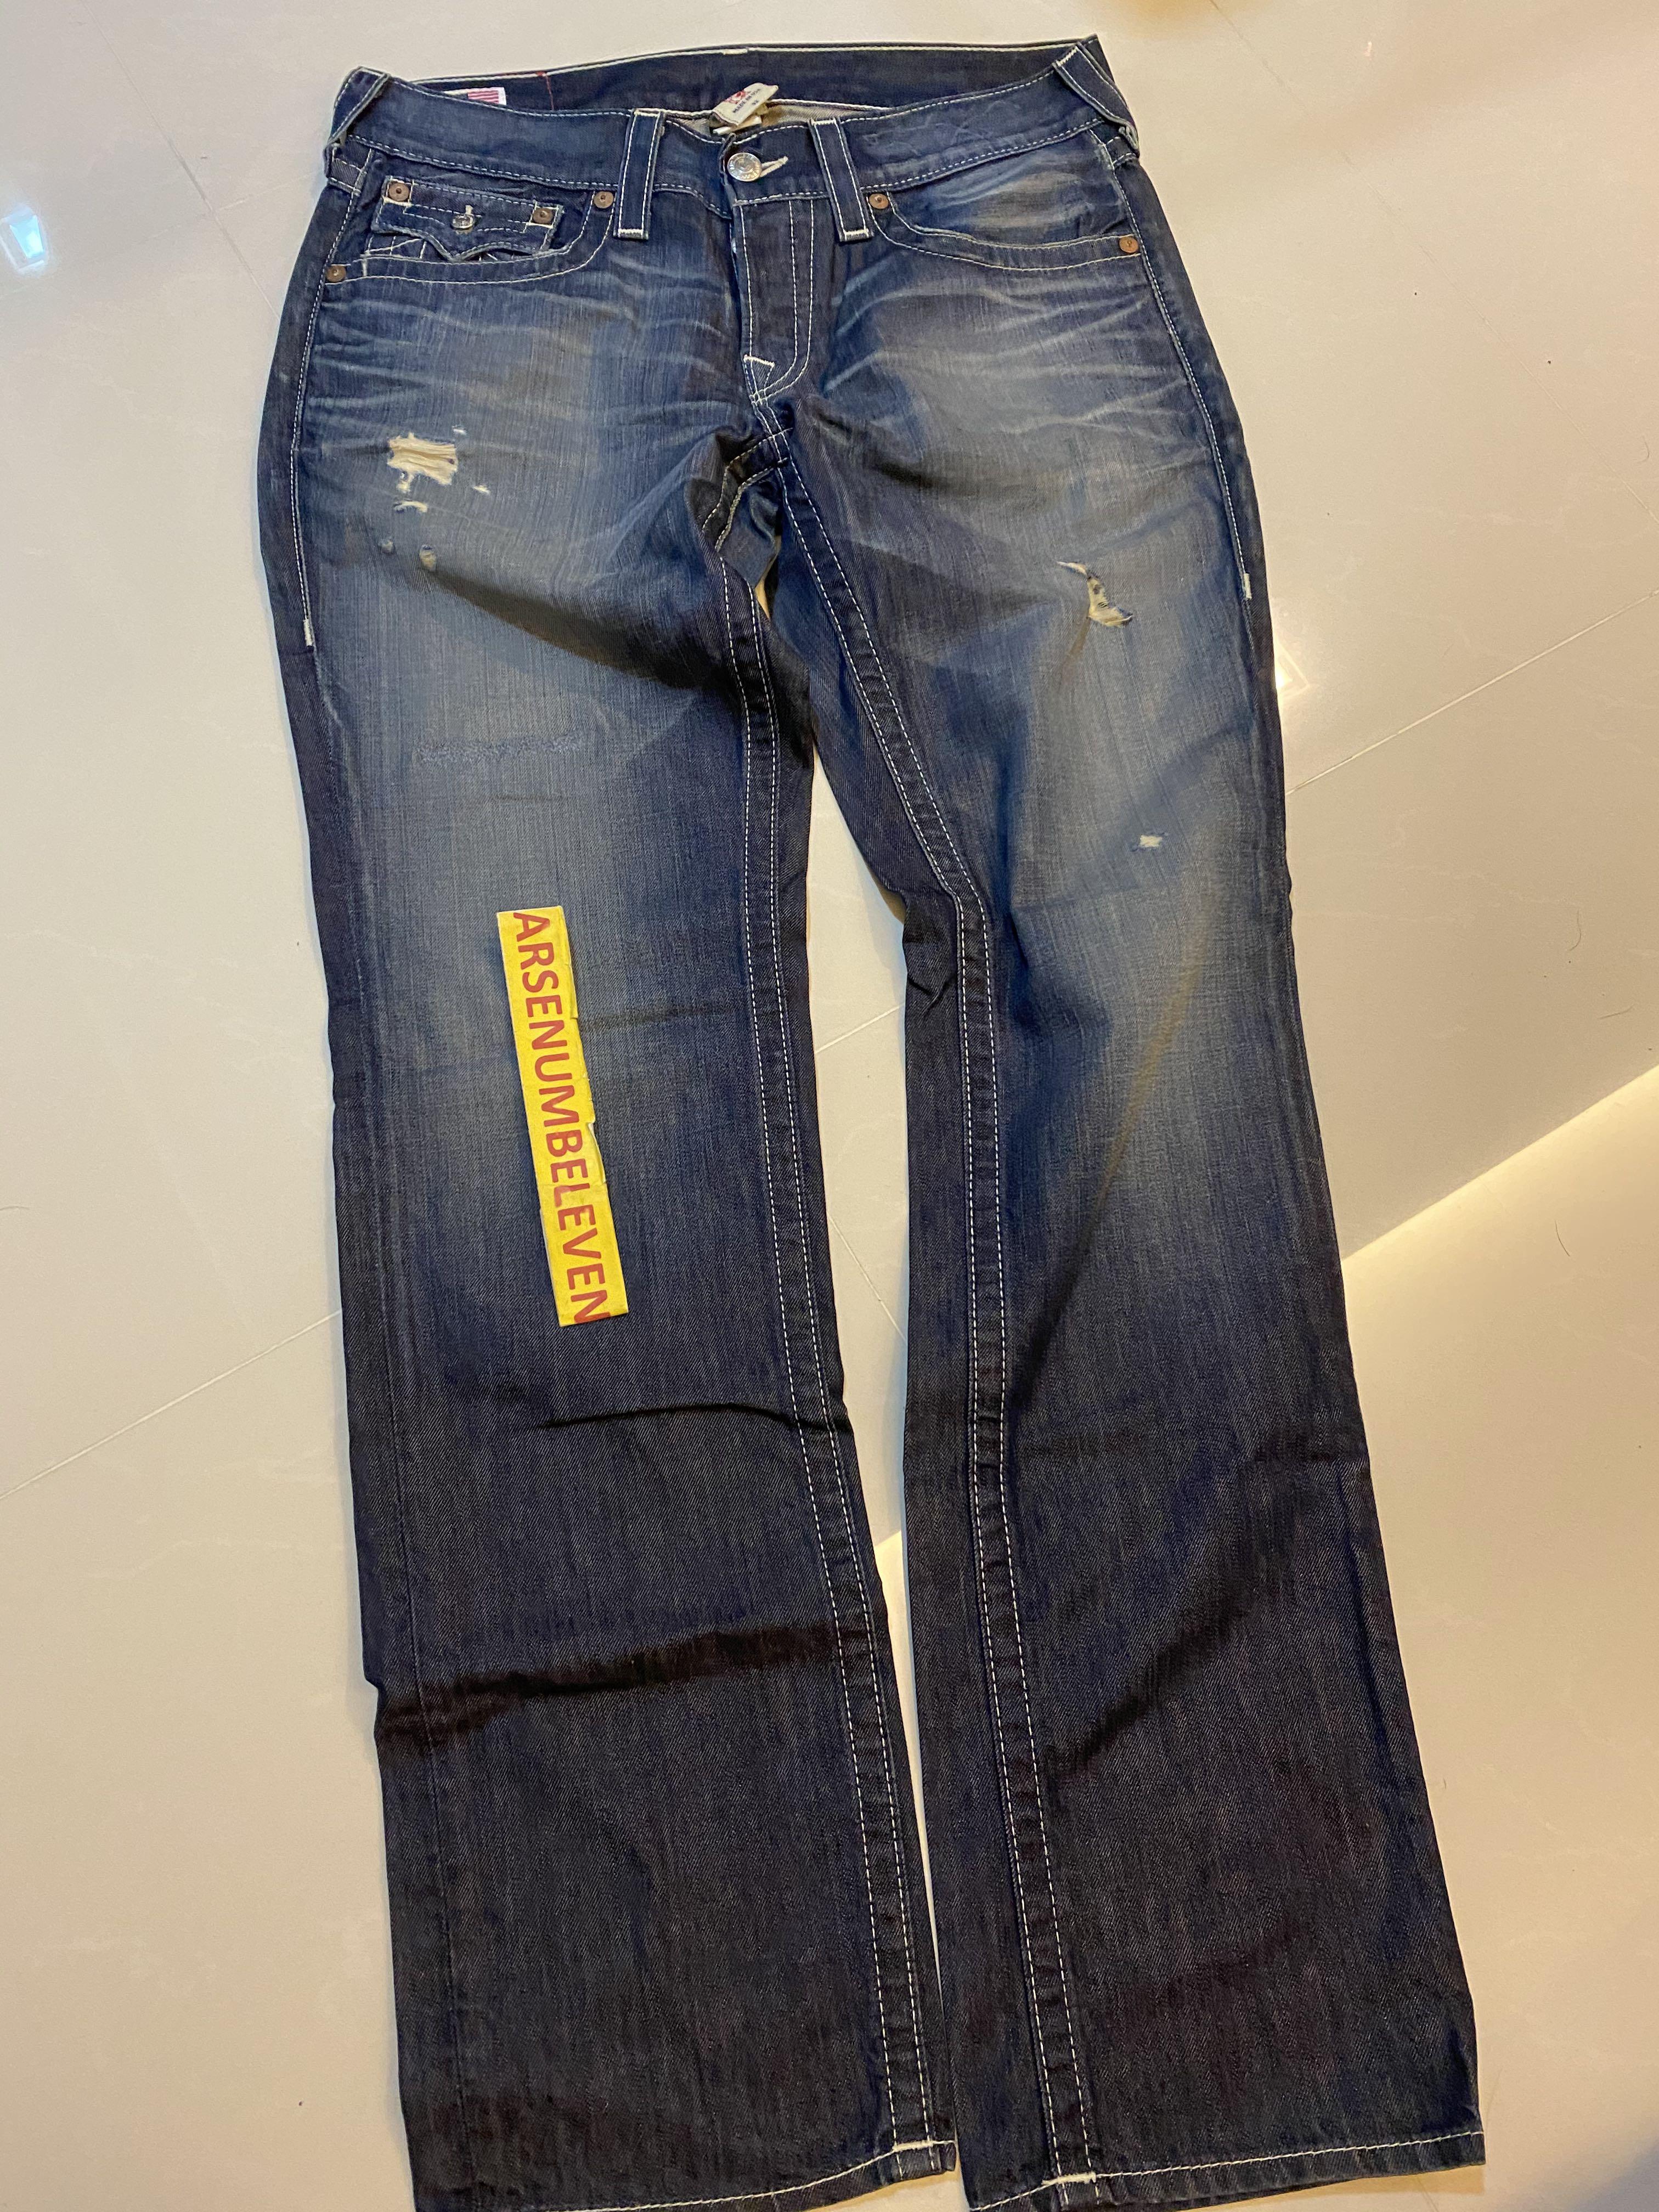 True religion jeans size 32 used once 